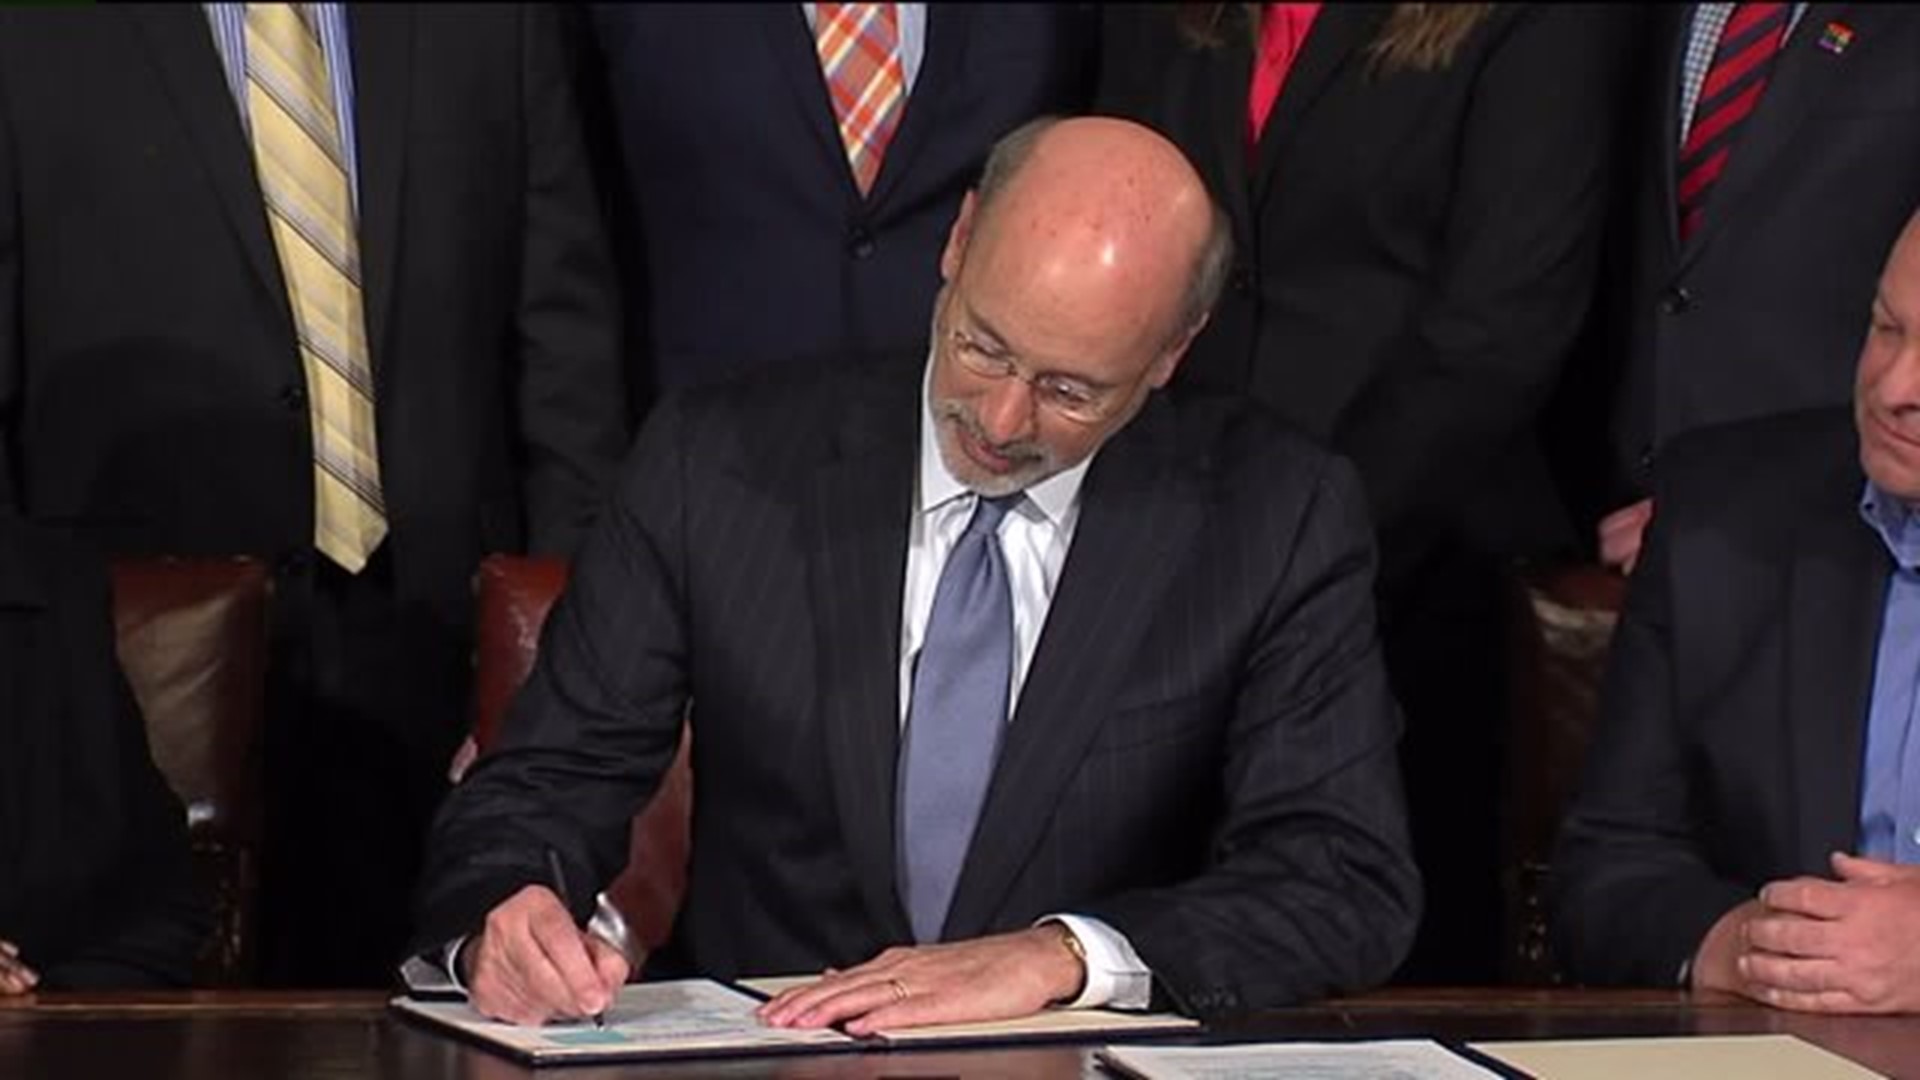 Gov. Wolf signs the anti-discriminations executive order